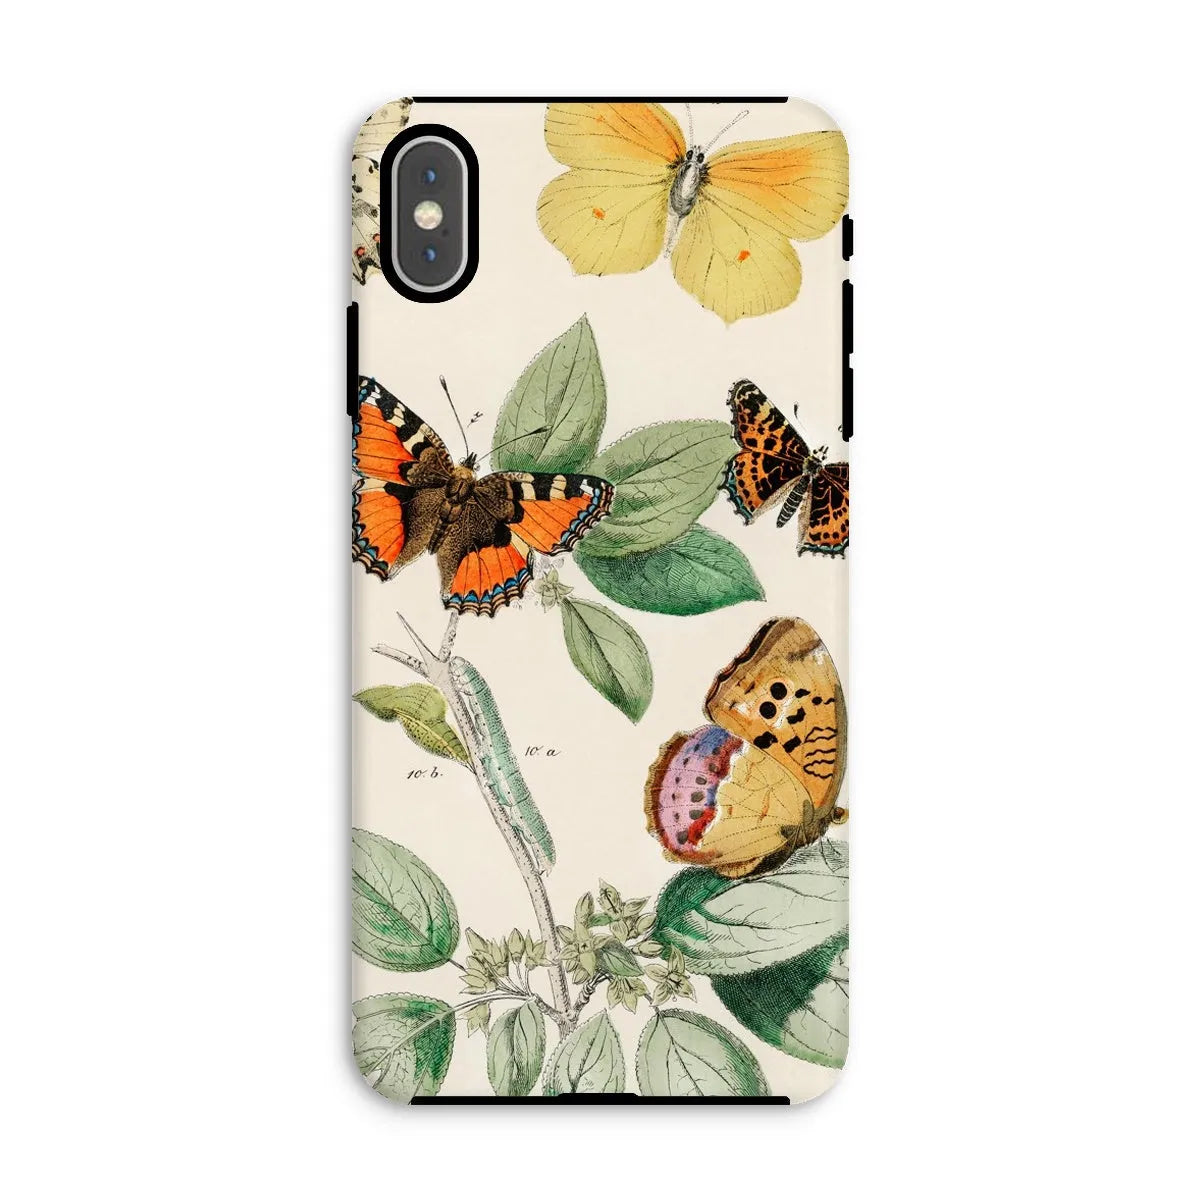 Butterfly Aesthetic Art Phone Case - William Forsell Kirby - Iphone Xs Max / Matte - Mobile Phone Cases - Aesthetic Art